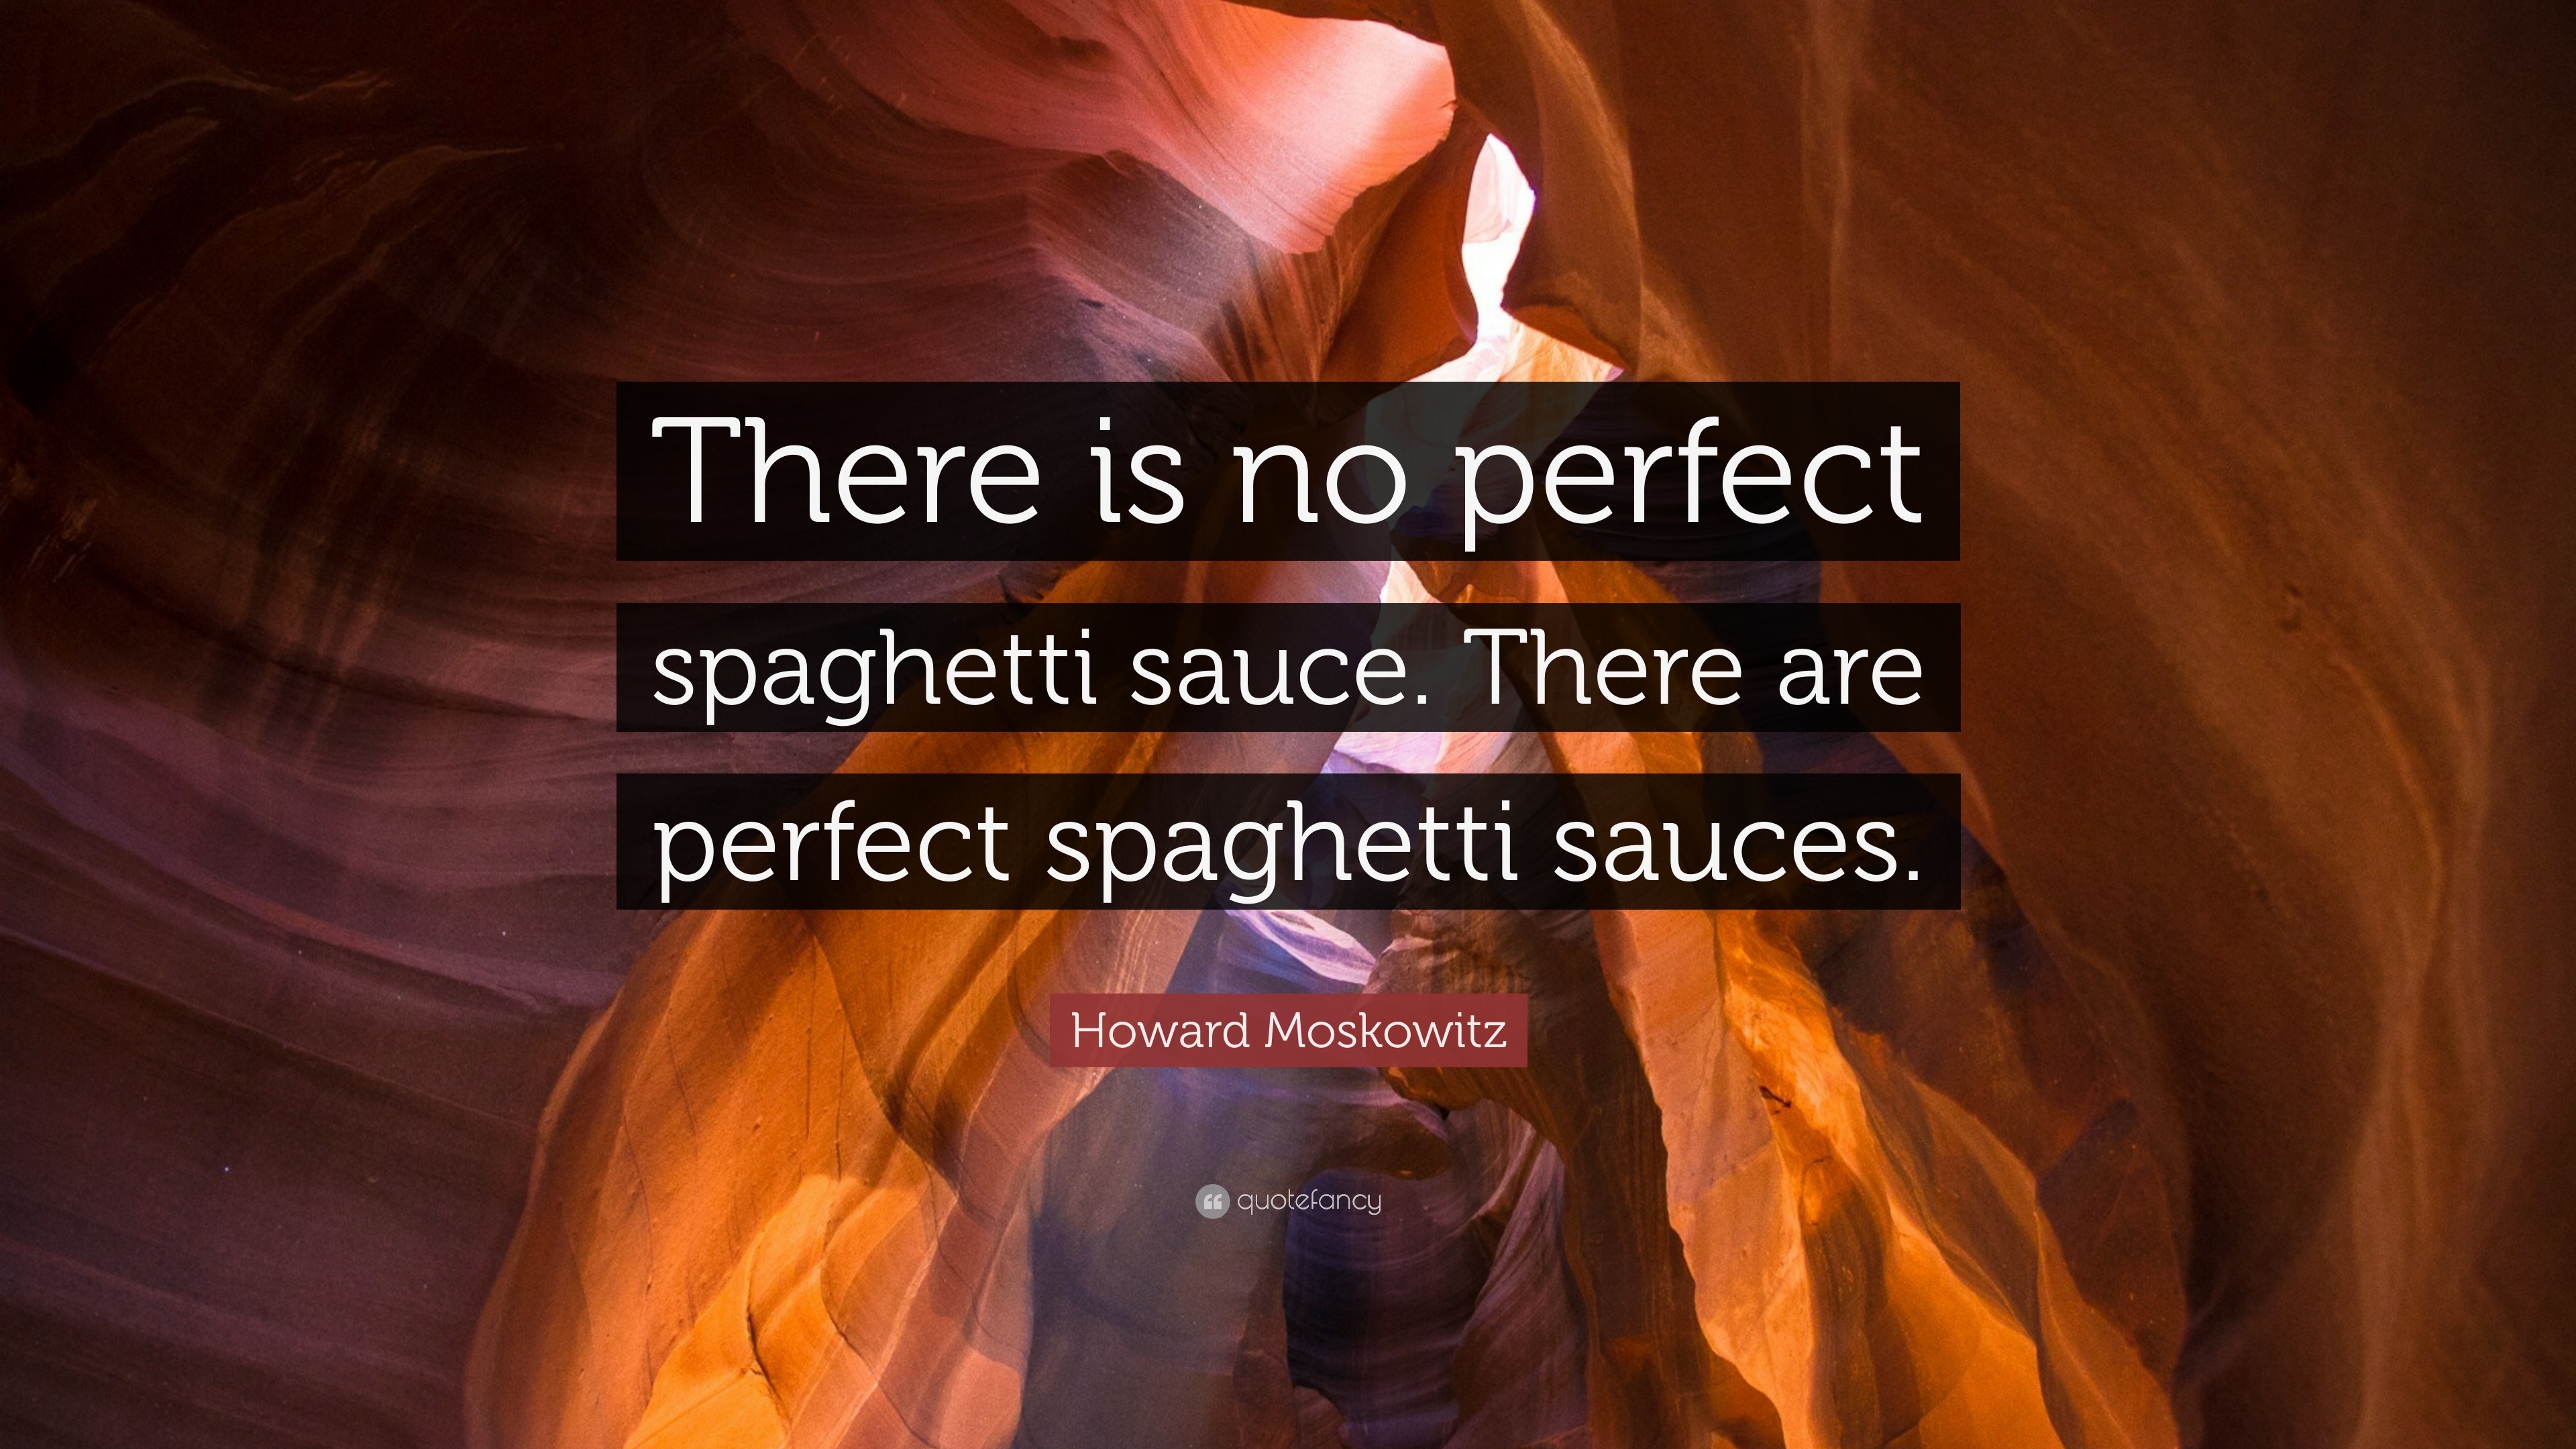 Howard Moskowitz Quote: “There is no perfect spaghetti sauce. There are ...